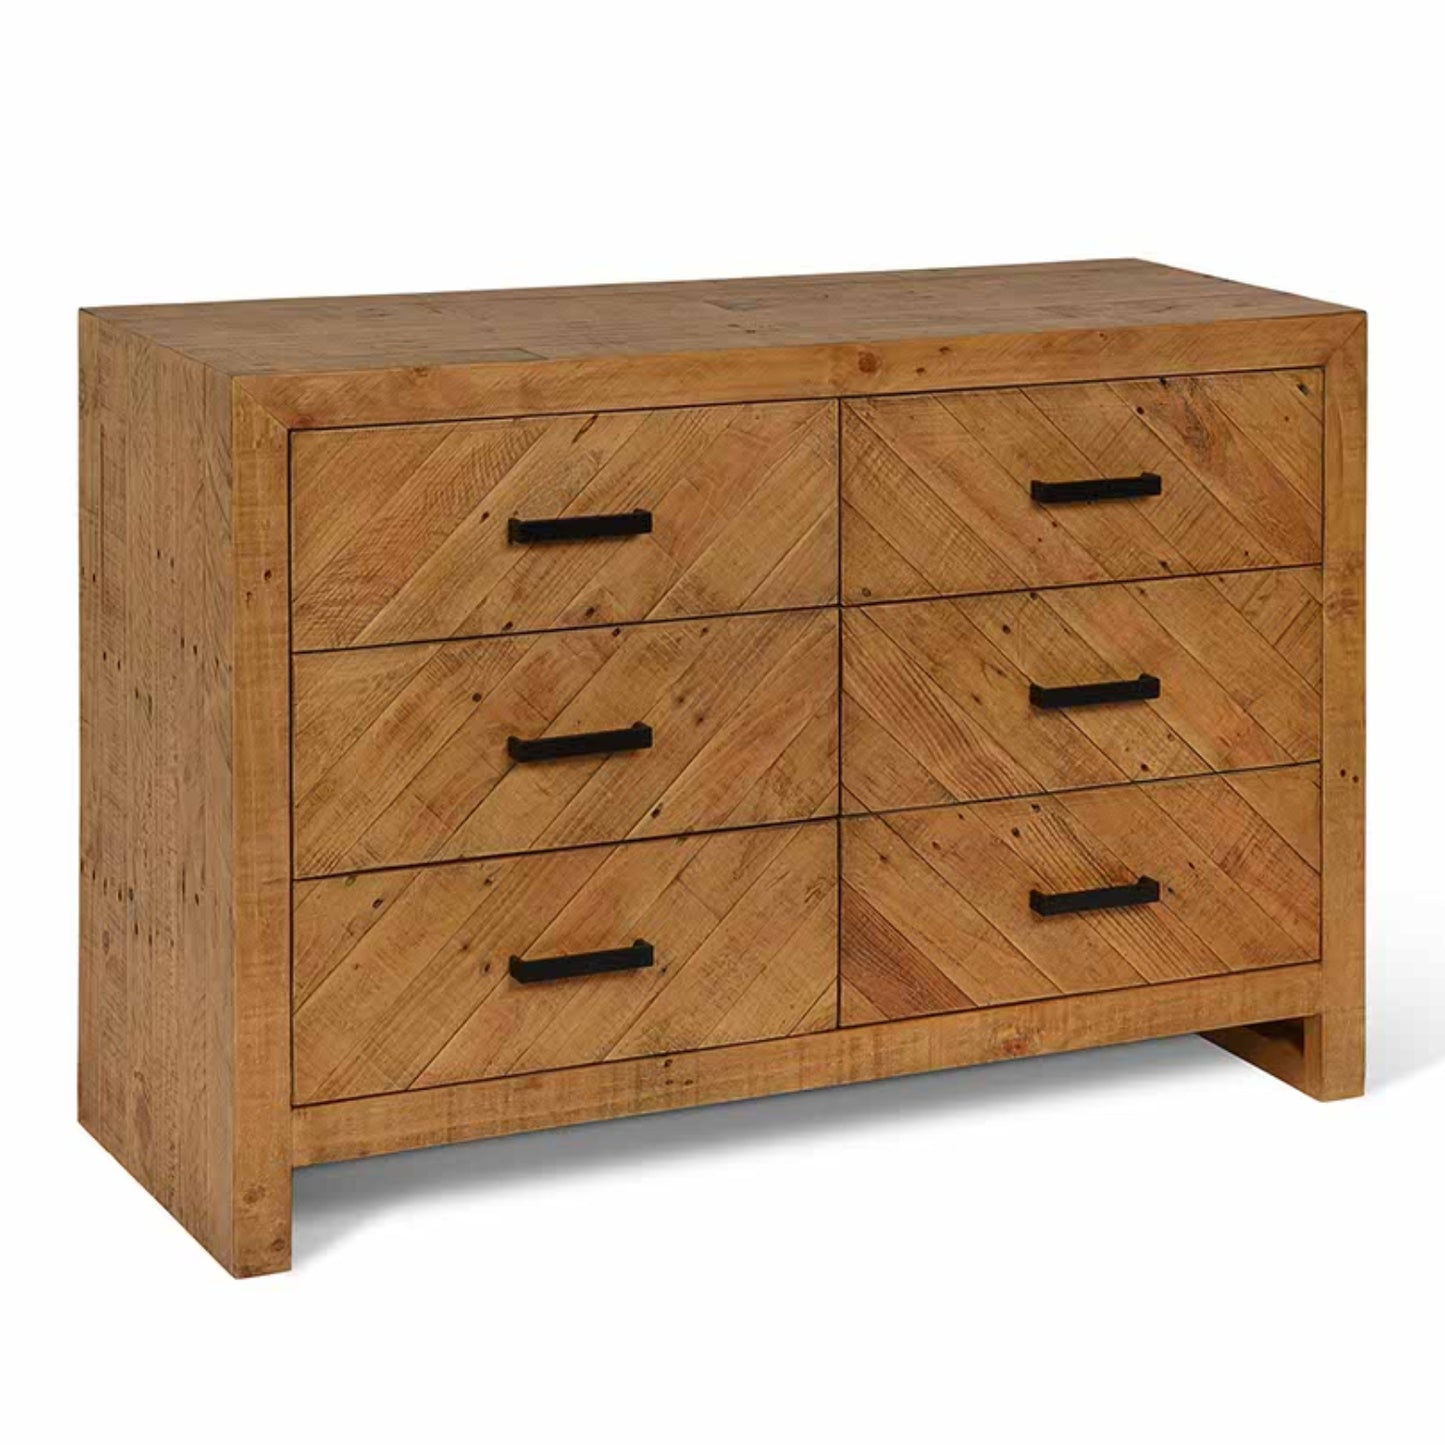 Fawley Eye-Catching Chevron Chest of Drawers